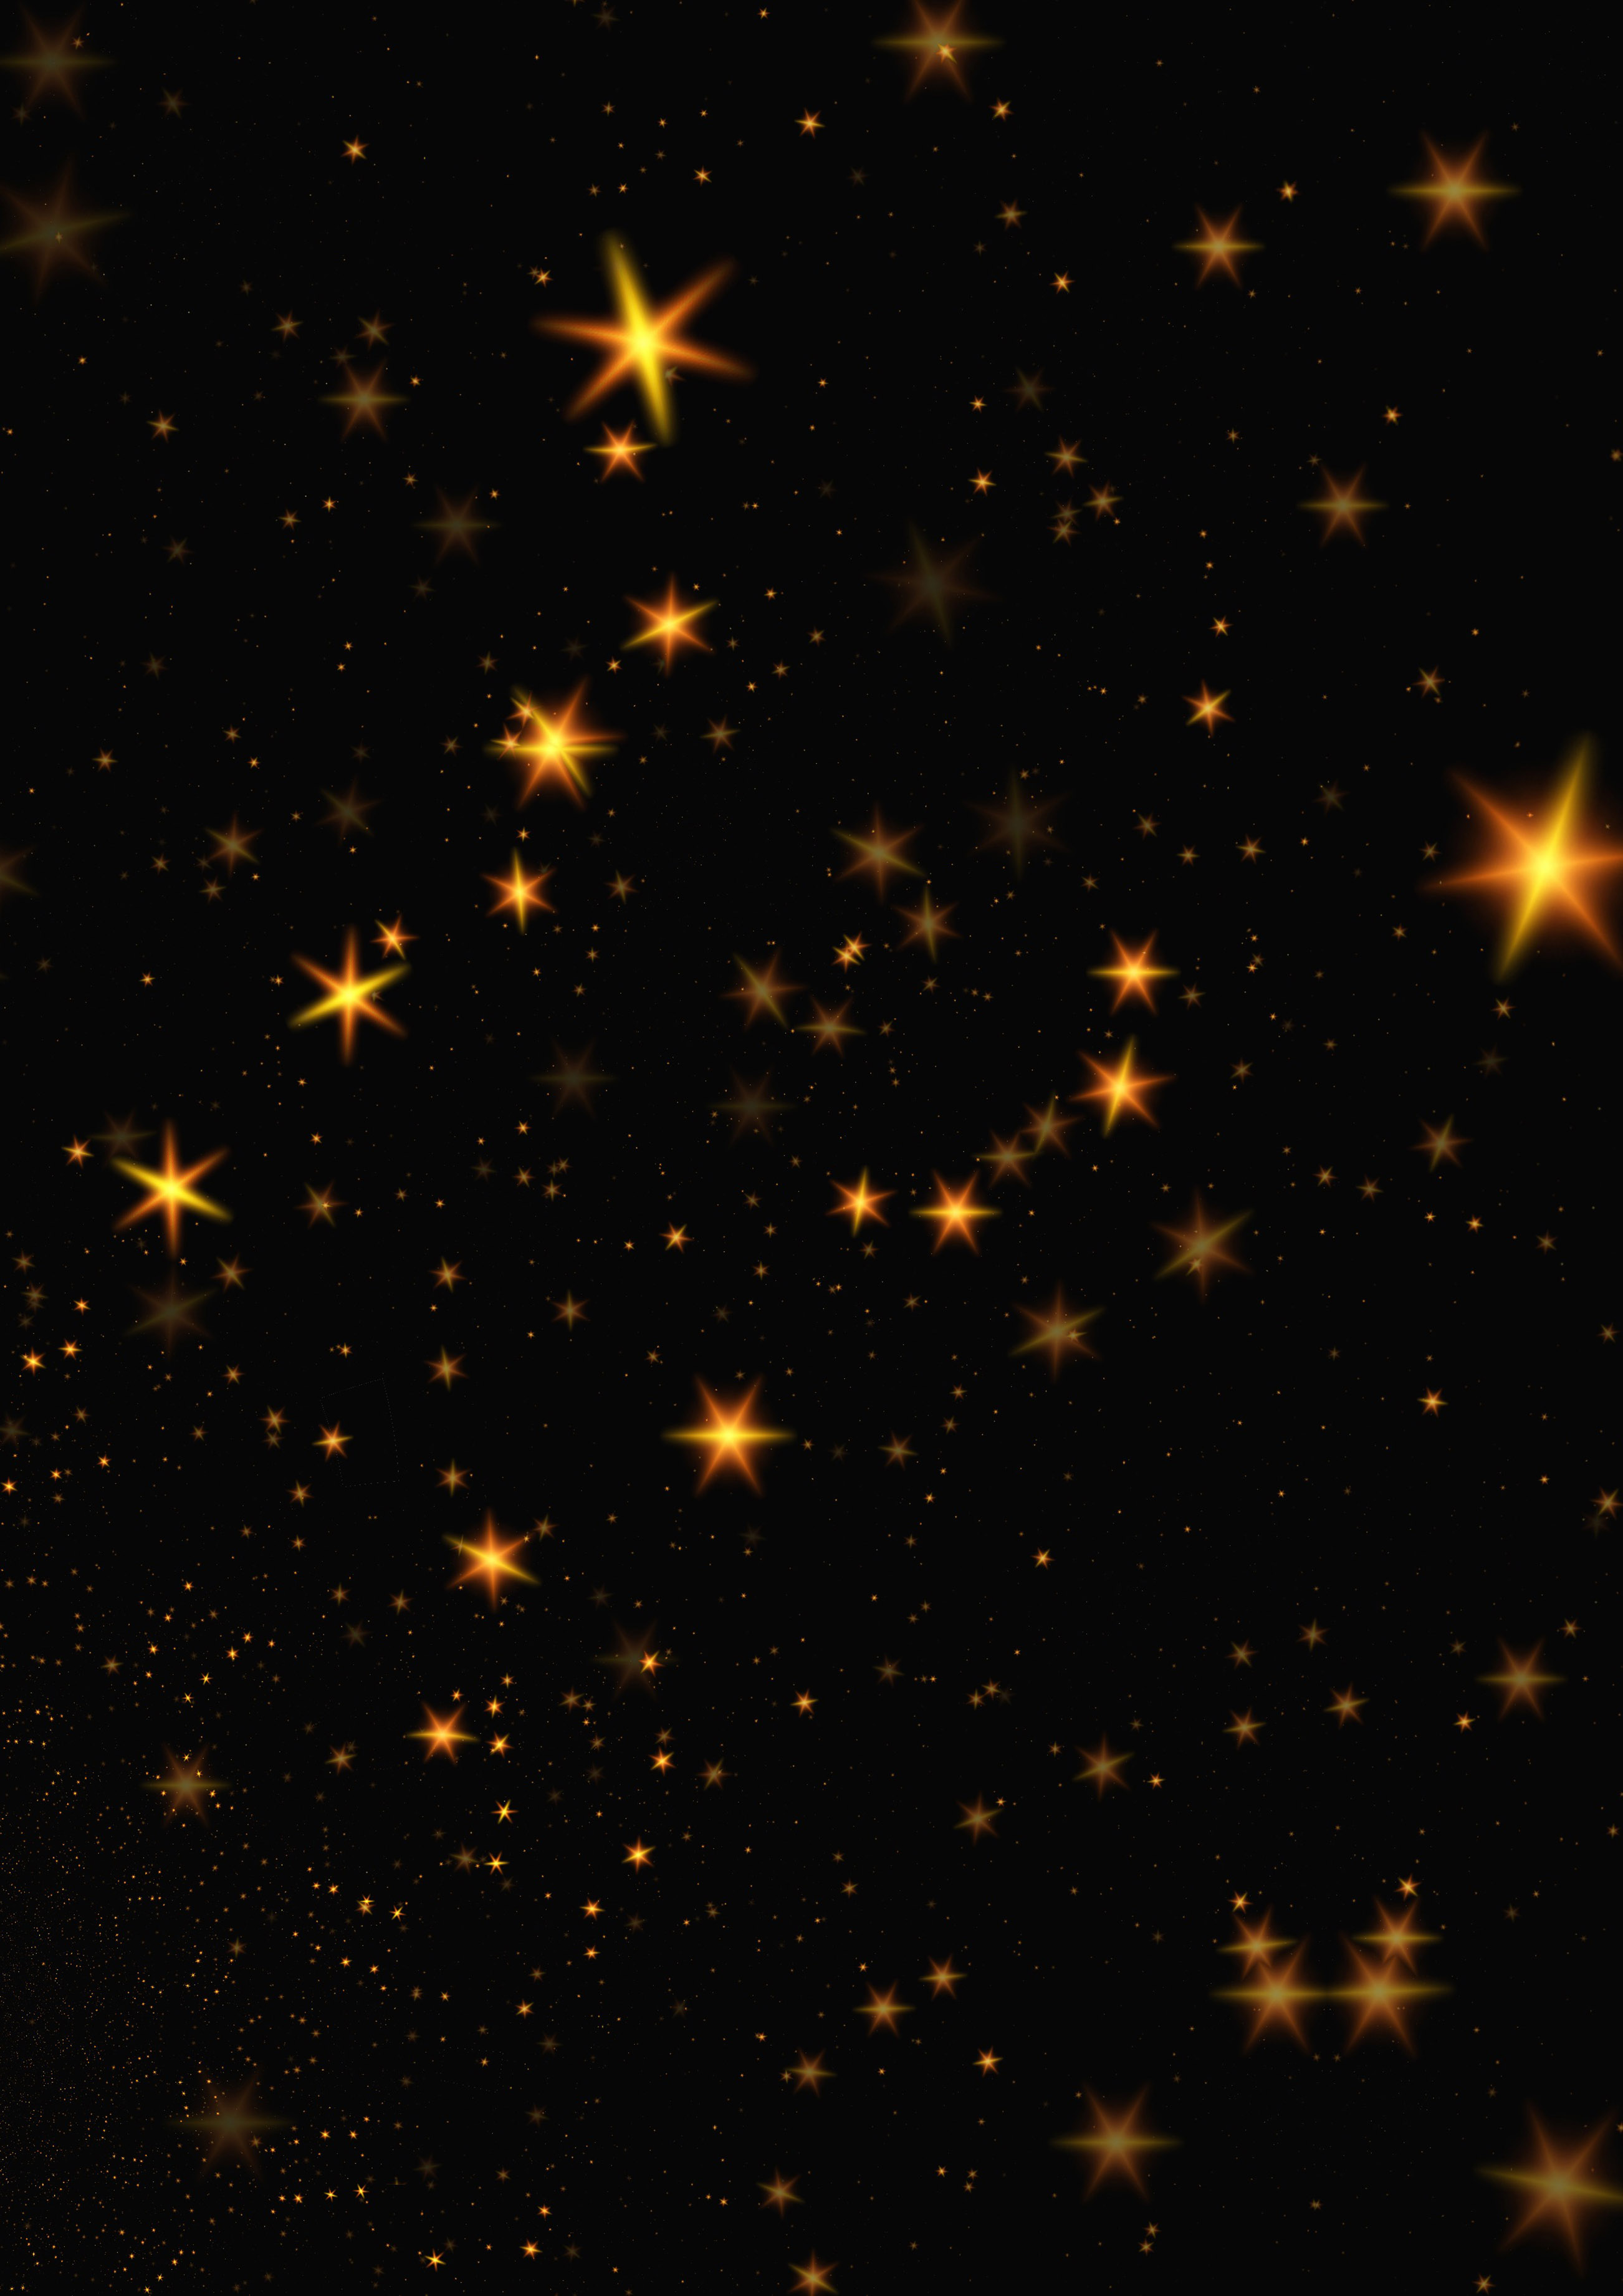 35 Stars at Xmas Background Images, Cards or Christmas Wallpapers